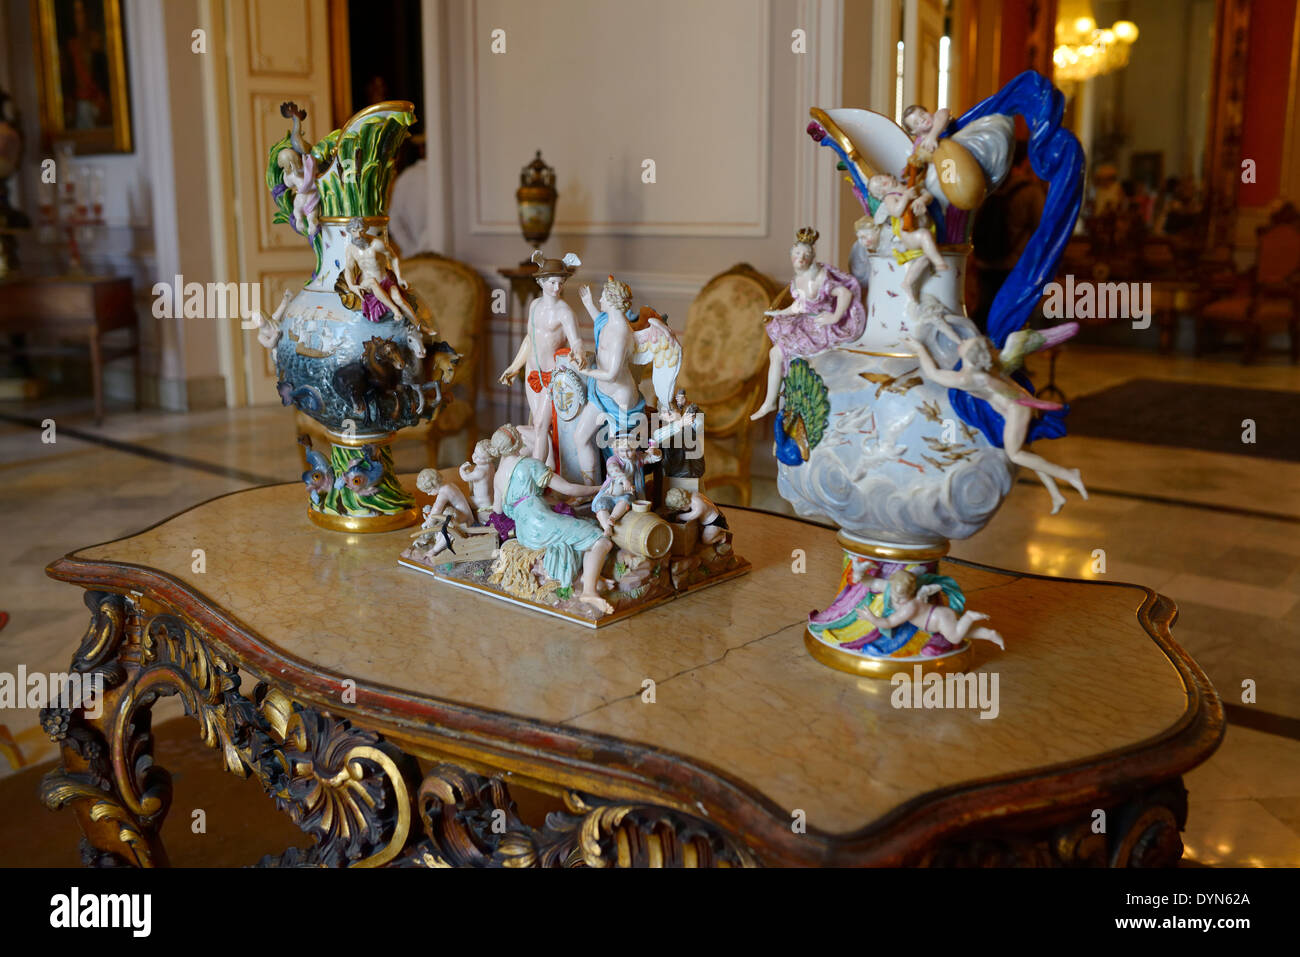 Fine Porcelain with opulent Colonial furnishing at the Governors Palace museum Old Havana Cuba Stock Photo